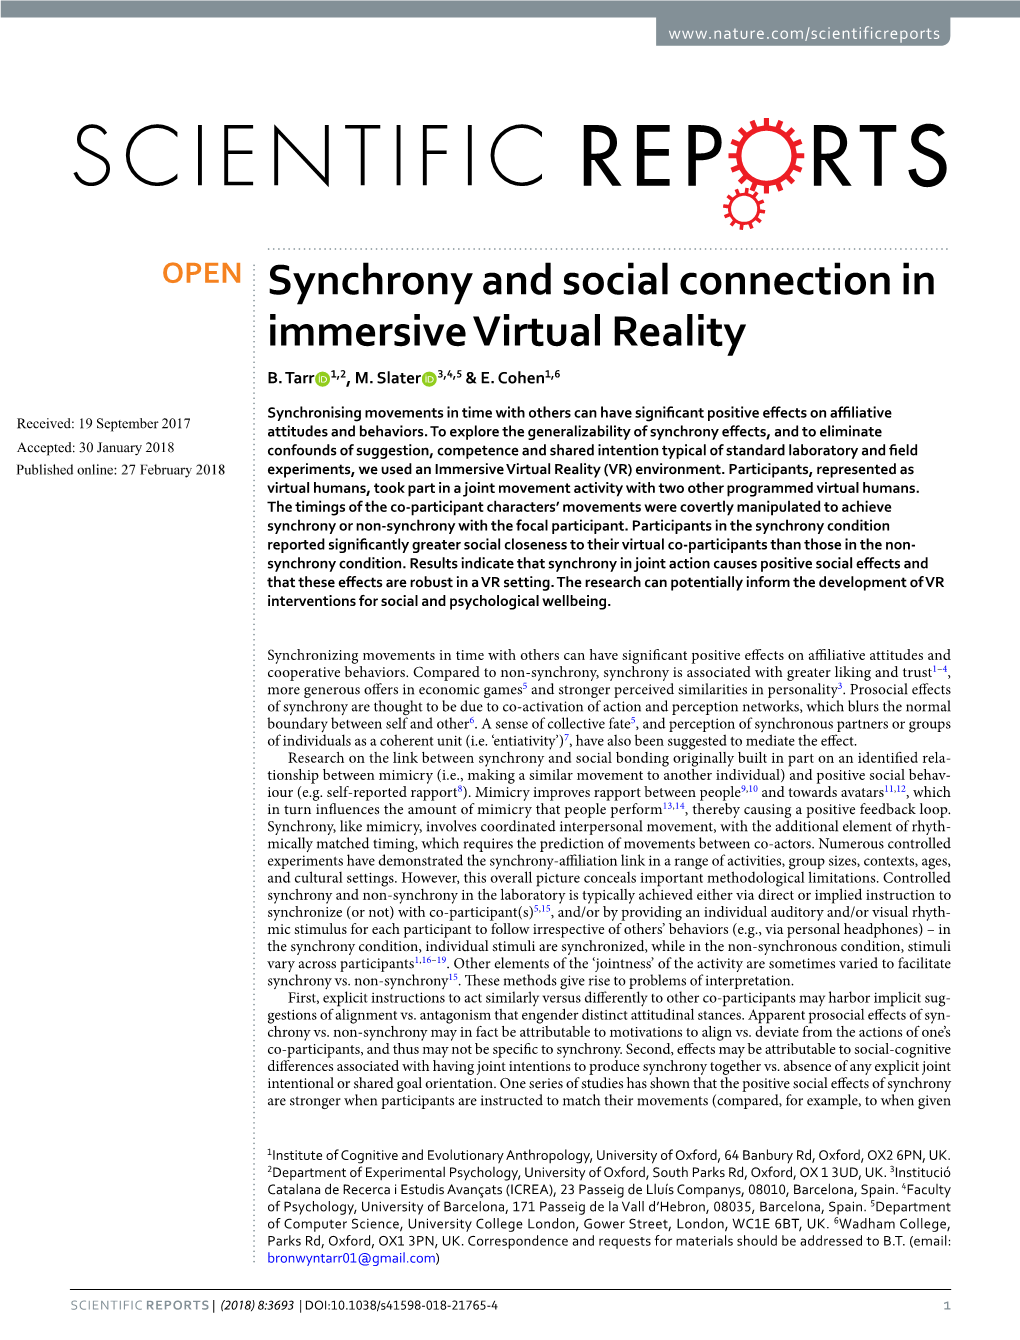 Synchrony and Social Connection in Immersive Virtual Reality B